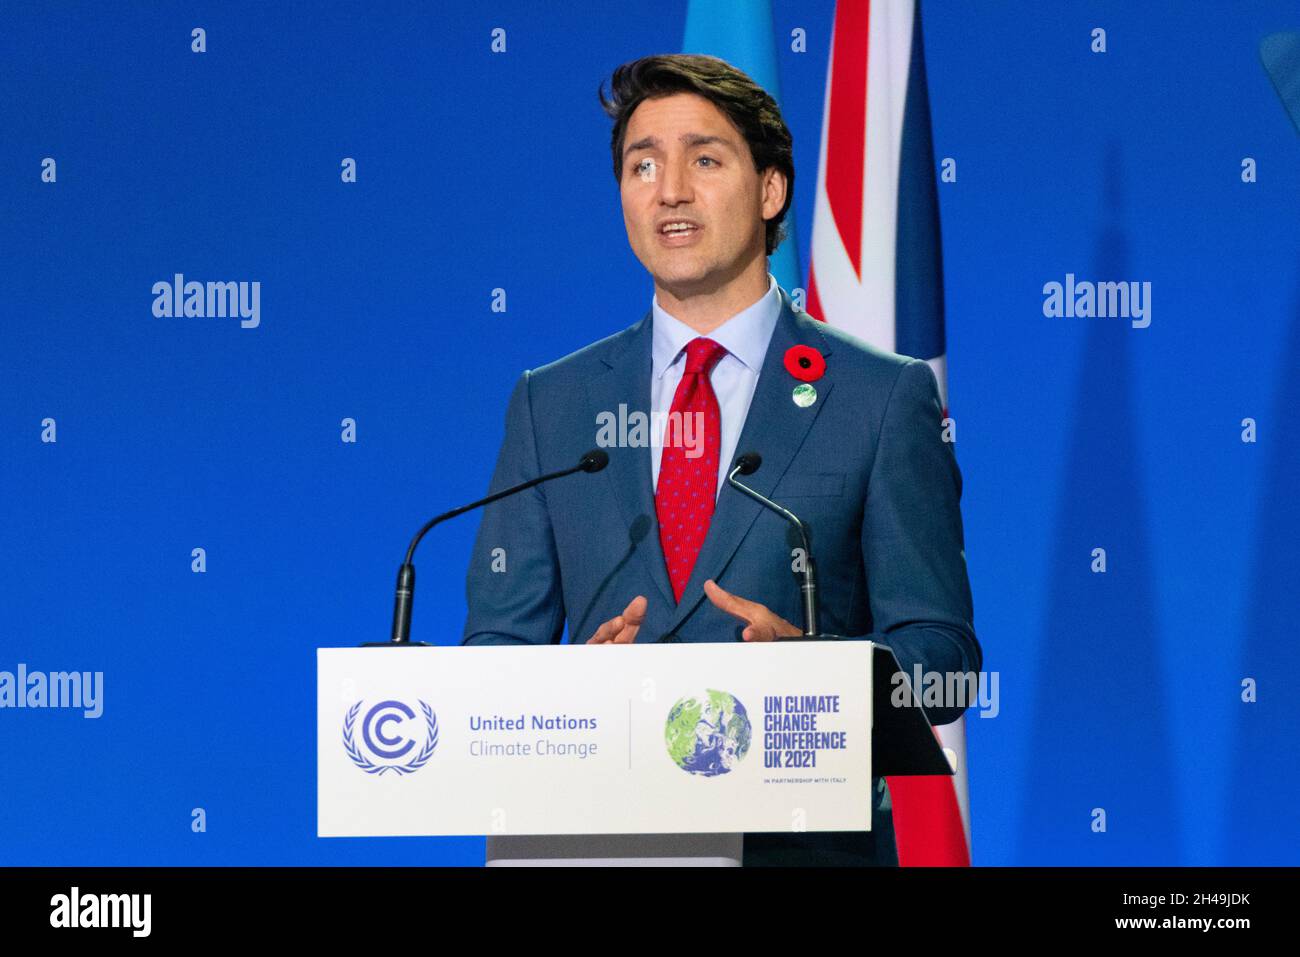 Glasgow, Scotland, UK. 1st November 2021.  Justin Trudeau Prime Minister of Canada gives speech to gives speech to the COP26 UN climate change conference in Glasgow.  Iain Masterton/Alamy Live News. Stock Photo